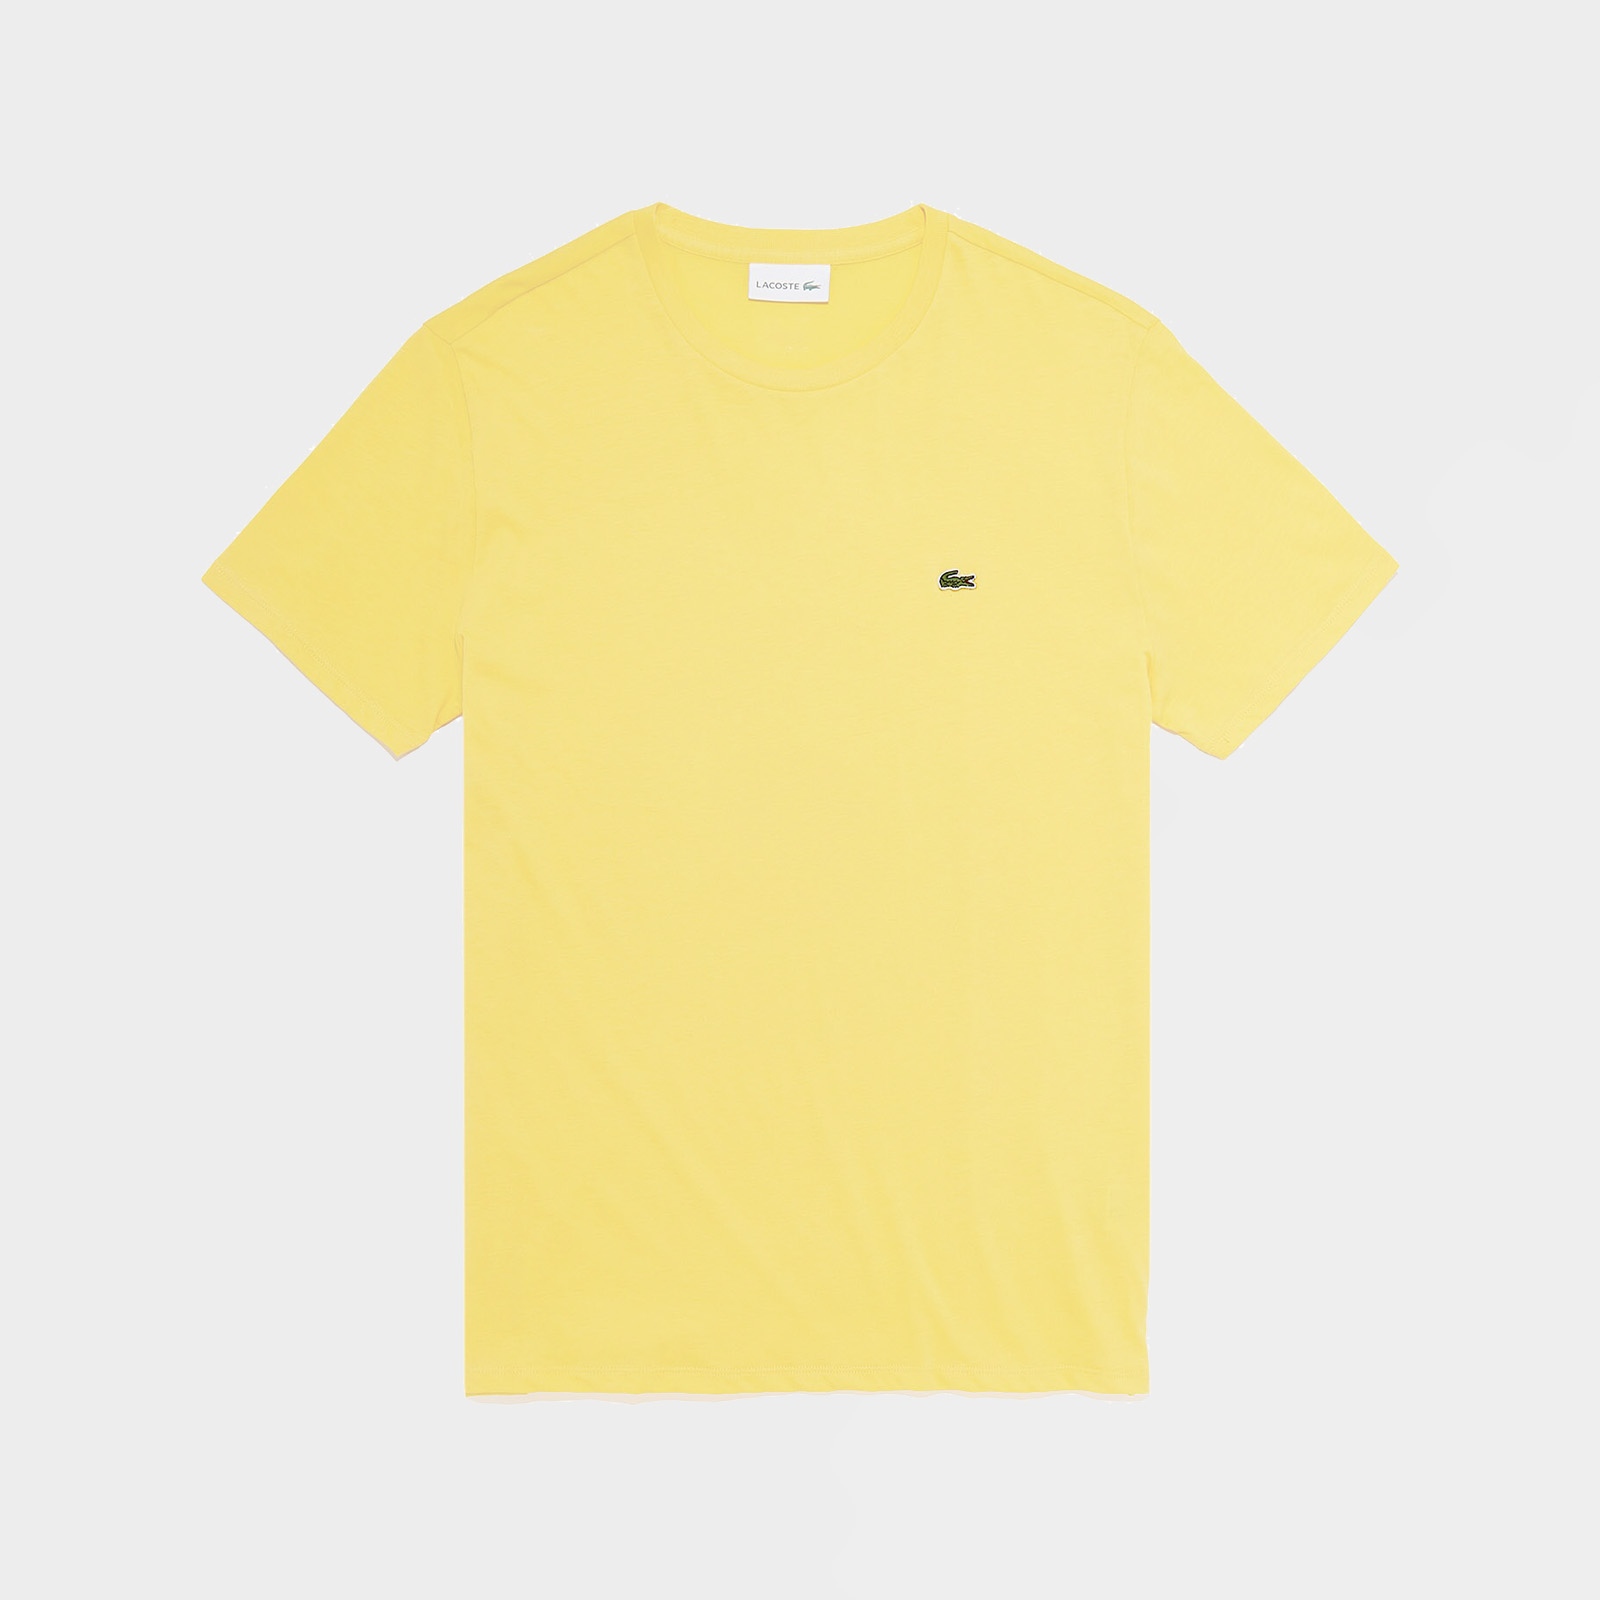 Lacoste Classic T-shirt Yellow (TH2038 